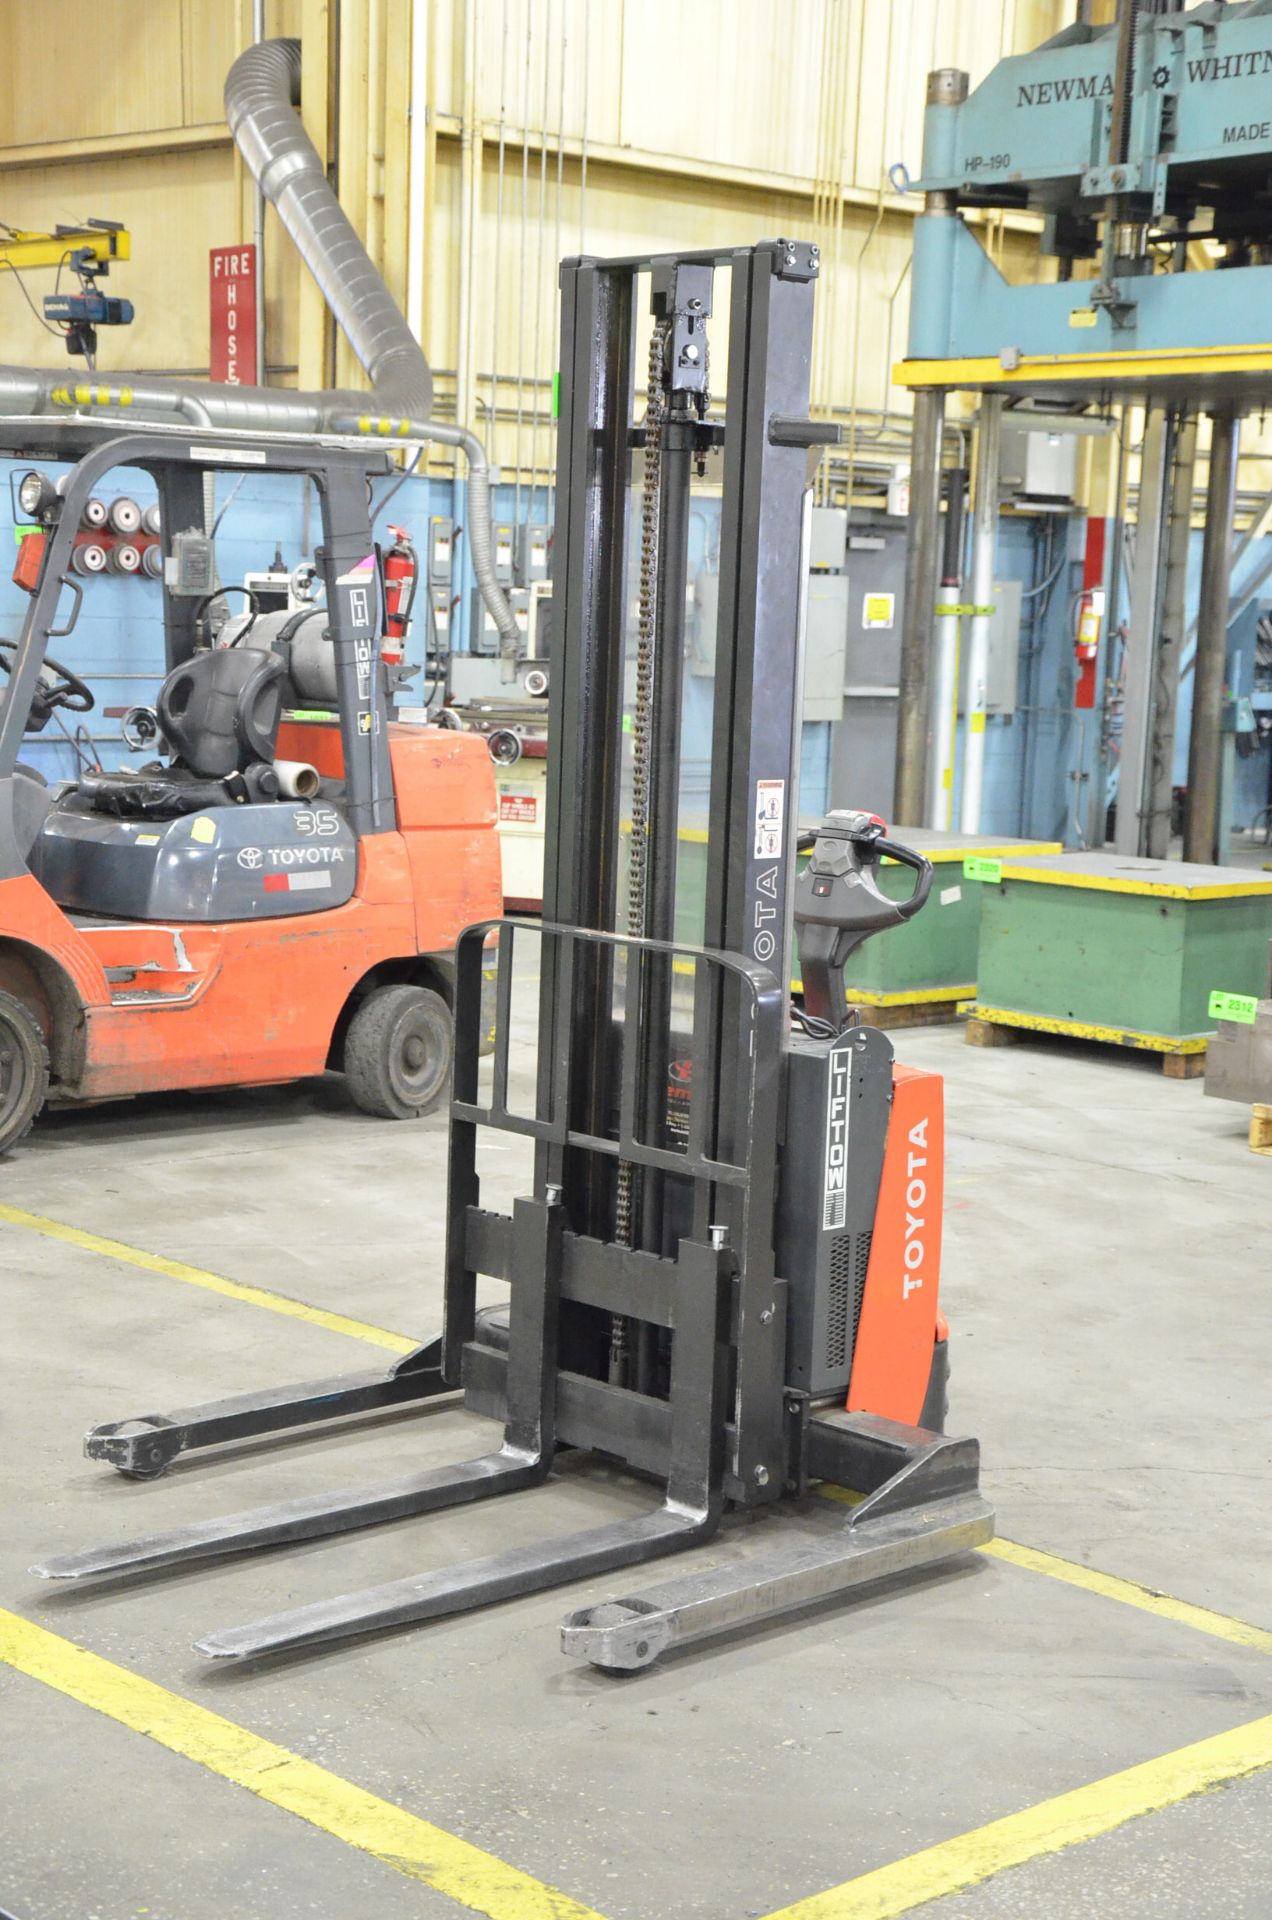 TOYOTA 7BWS13 24V 2500 LB. CAPACITY WALK-BEHIND ELECTRIC PALLET STACKER WITH 143" MAX. LIFT - Image 2 of 8